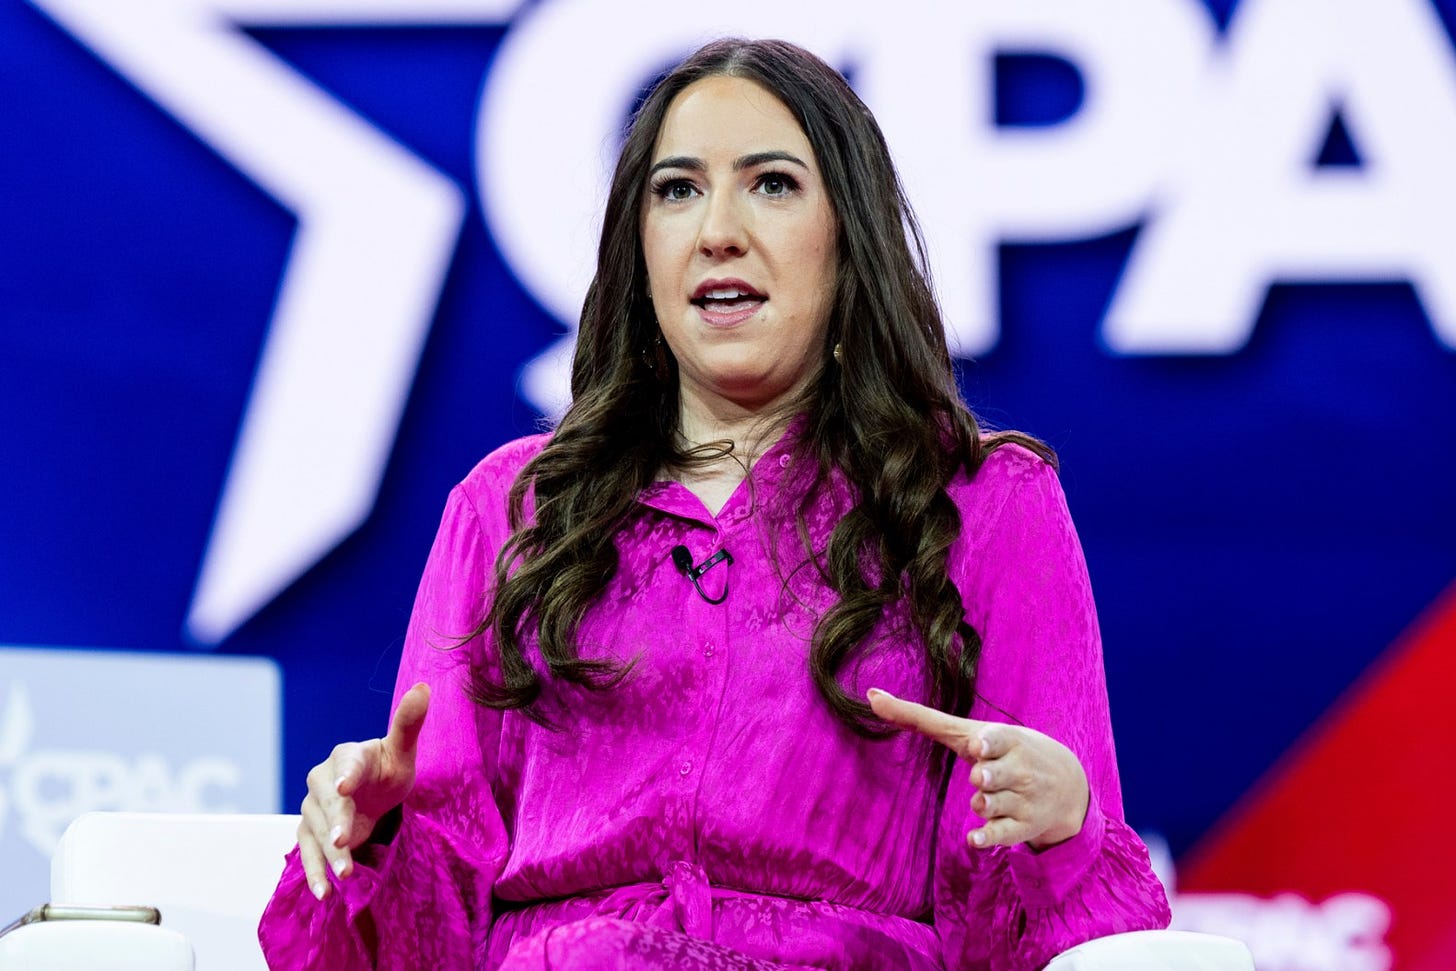 Chaya Raichik, creator of Libs of TikTok, speaking at the Conservative Political Action Conference (CPAC) held at the Gaylord National Resort & Convention Center in Oxon Hill, Maryland. (Photo by Michael Brochstein/Sipa USA)(Sipa via AP Images)